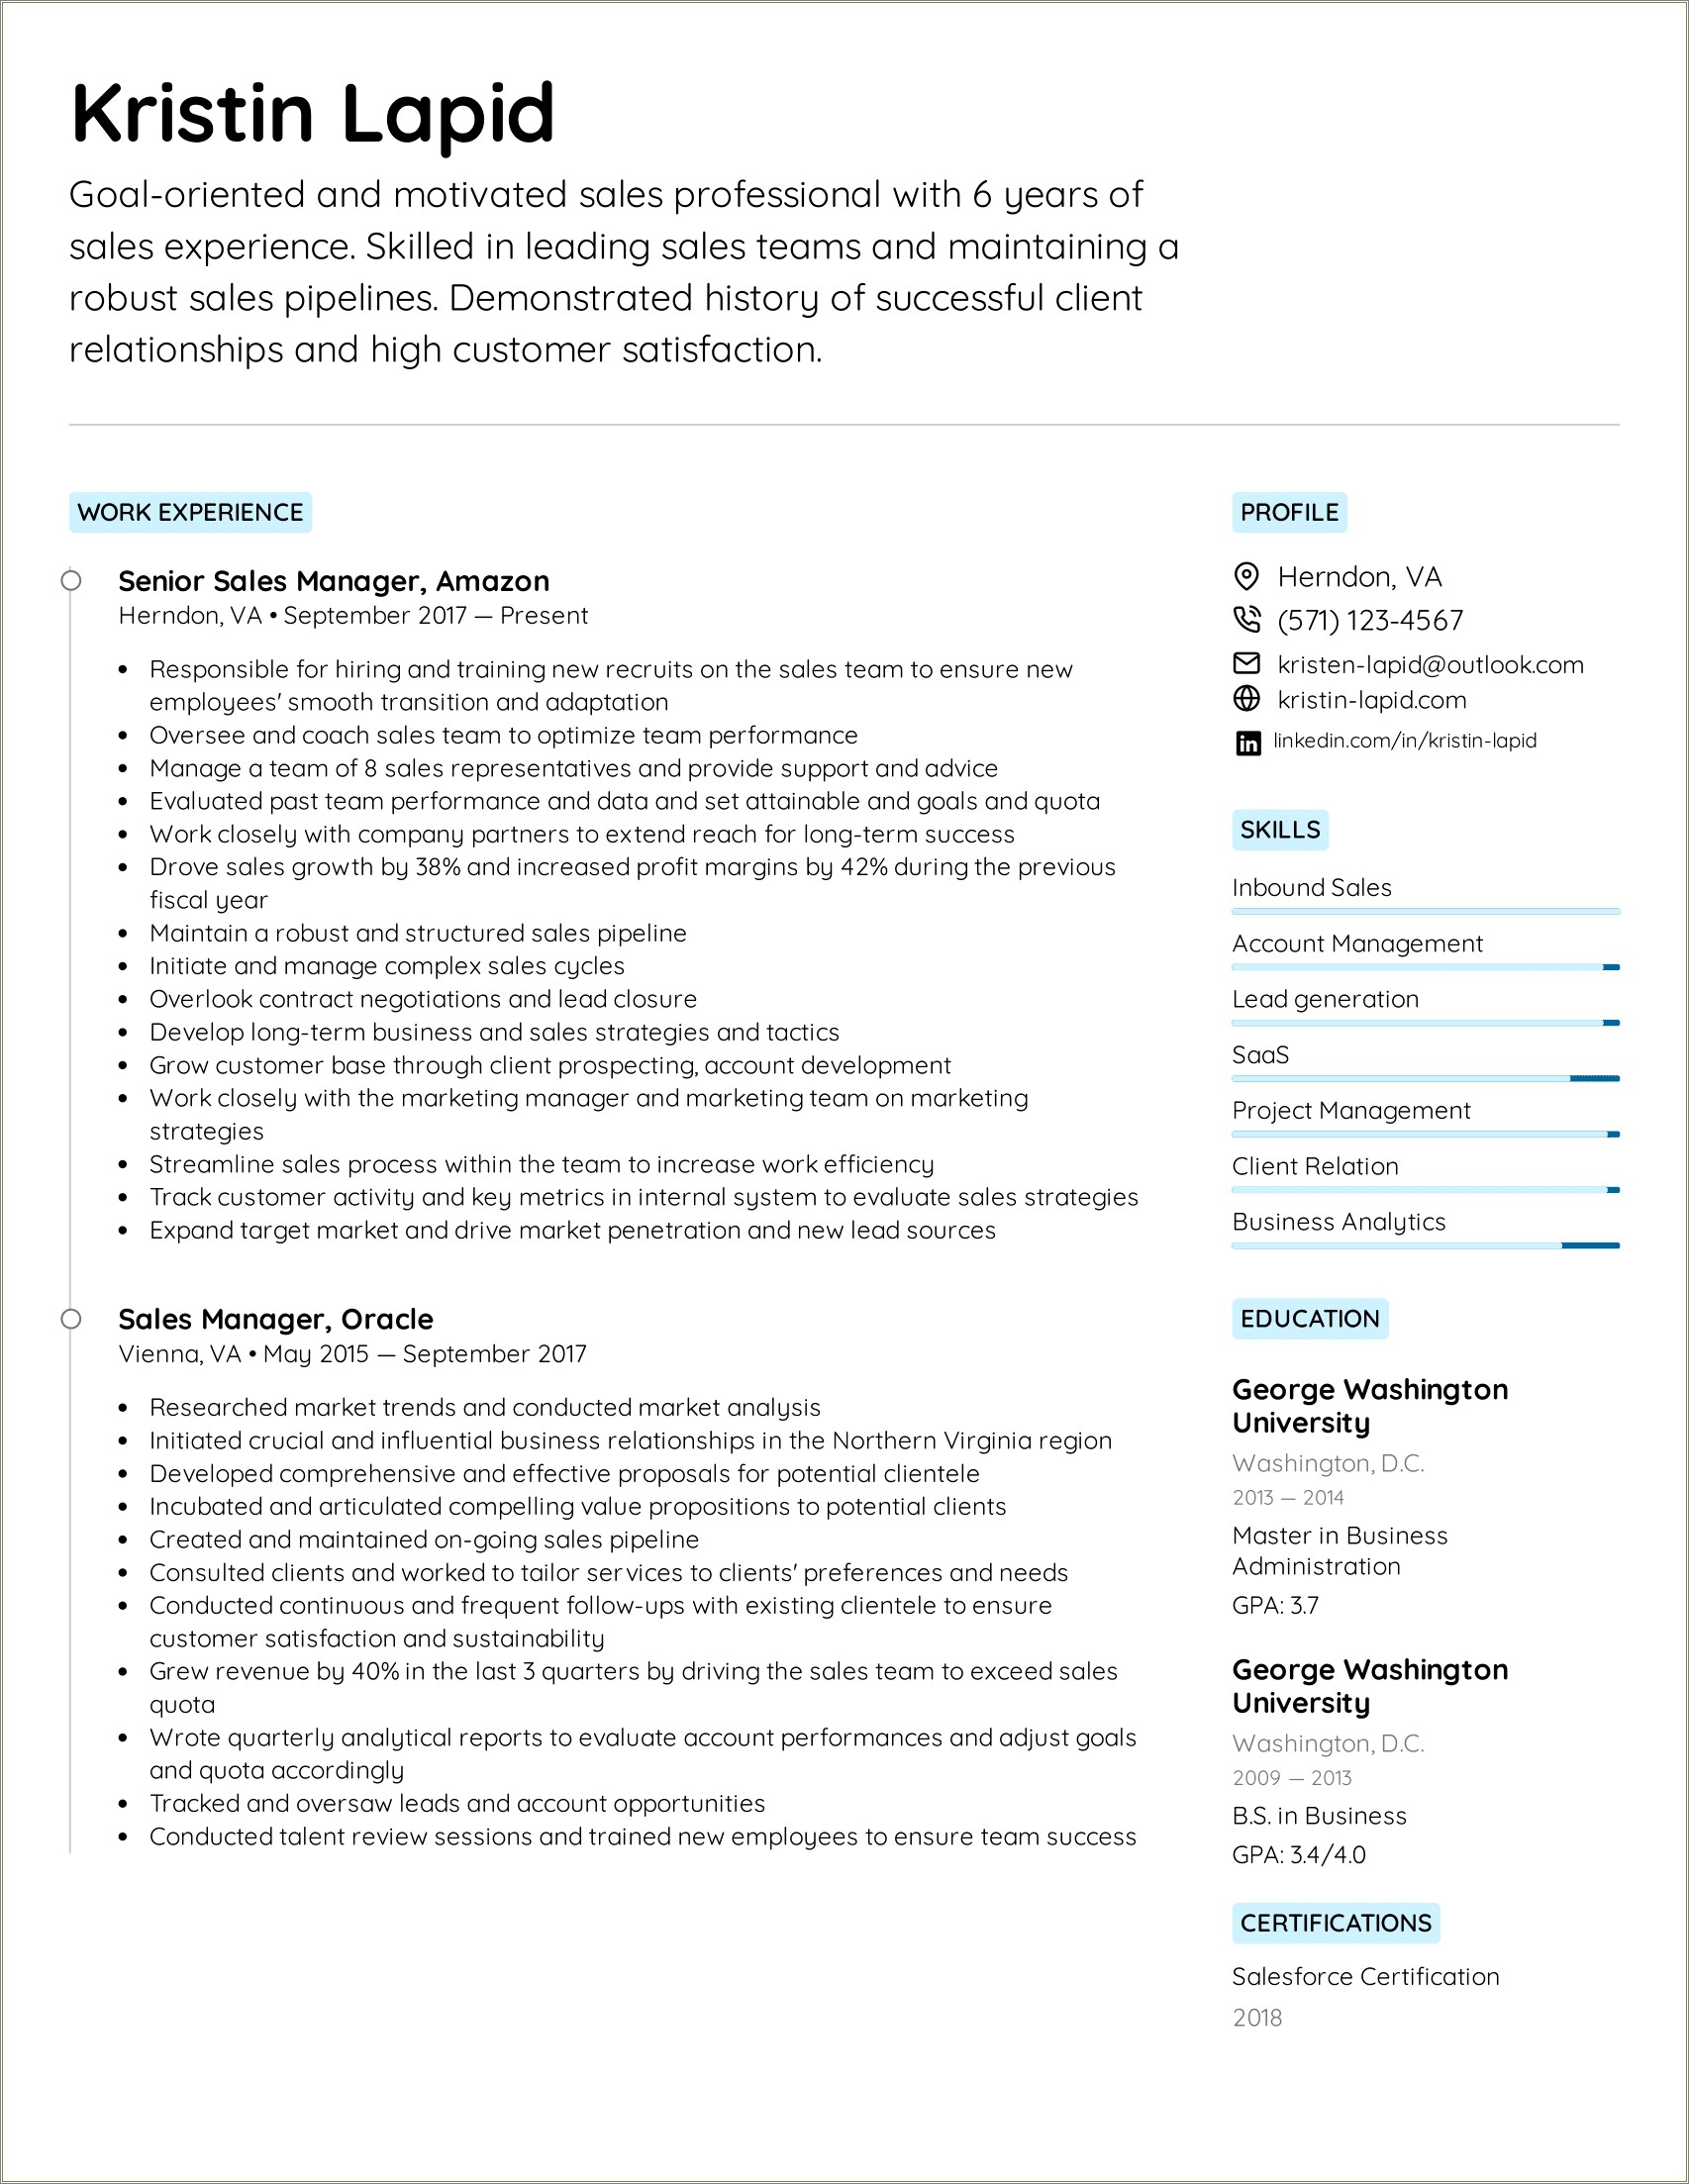 Listing Accomplishments On Resume By Jobs